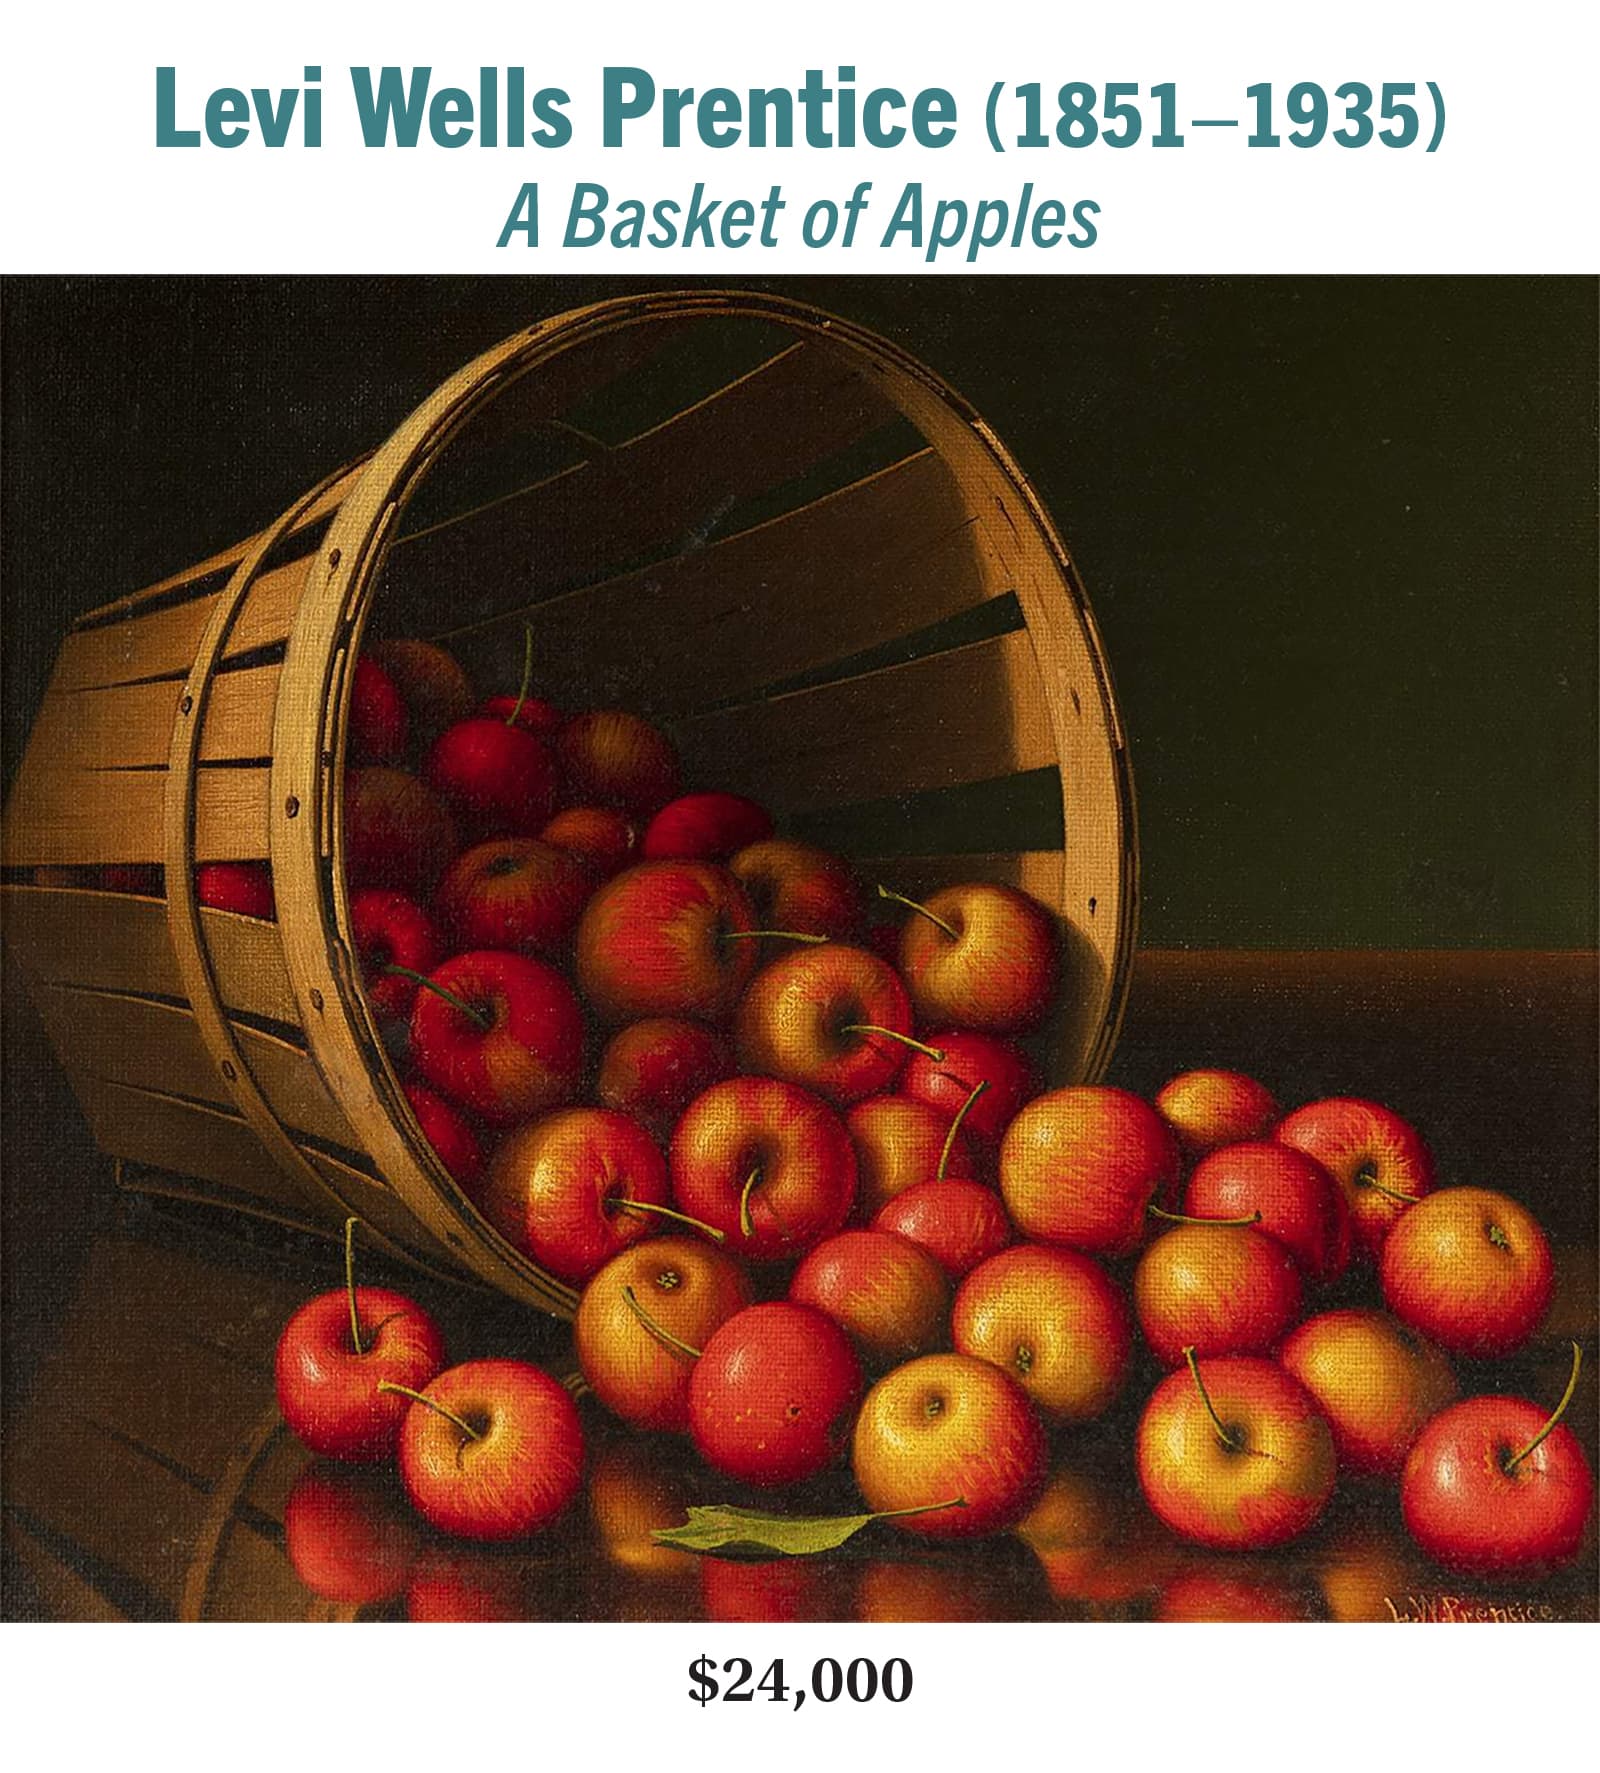 Levi Wells Prentice (1851–1935), A Basket of Apples, oil on canvas, American still-life painting